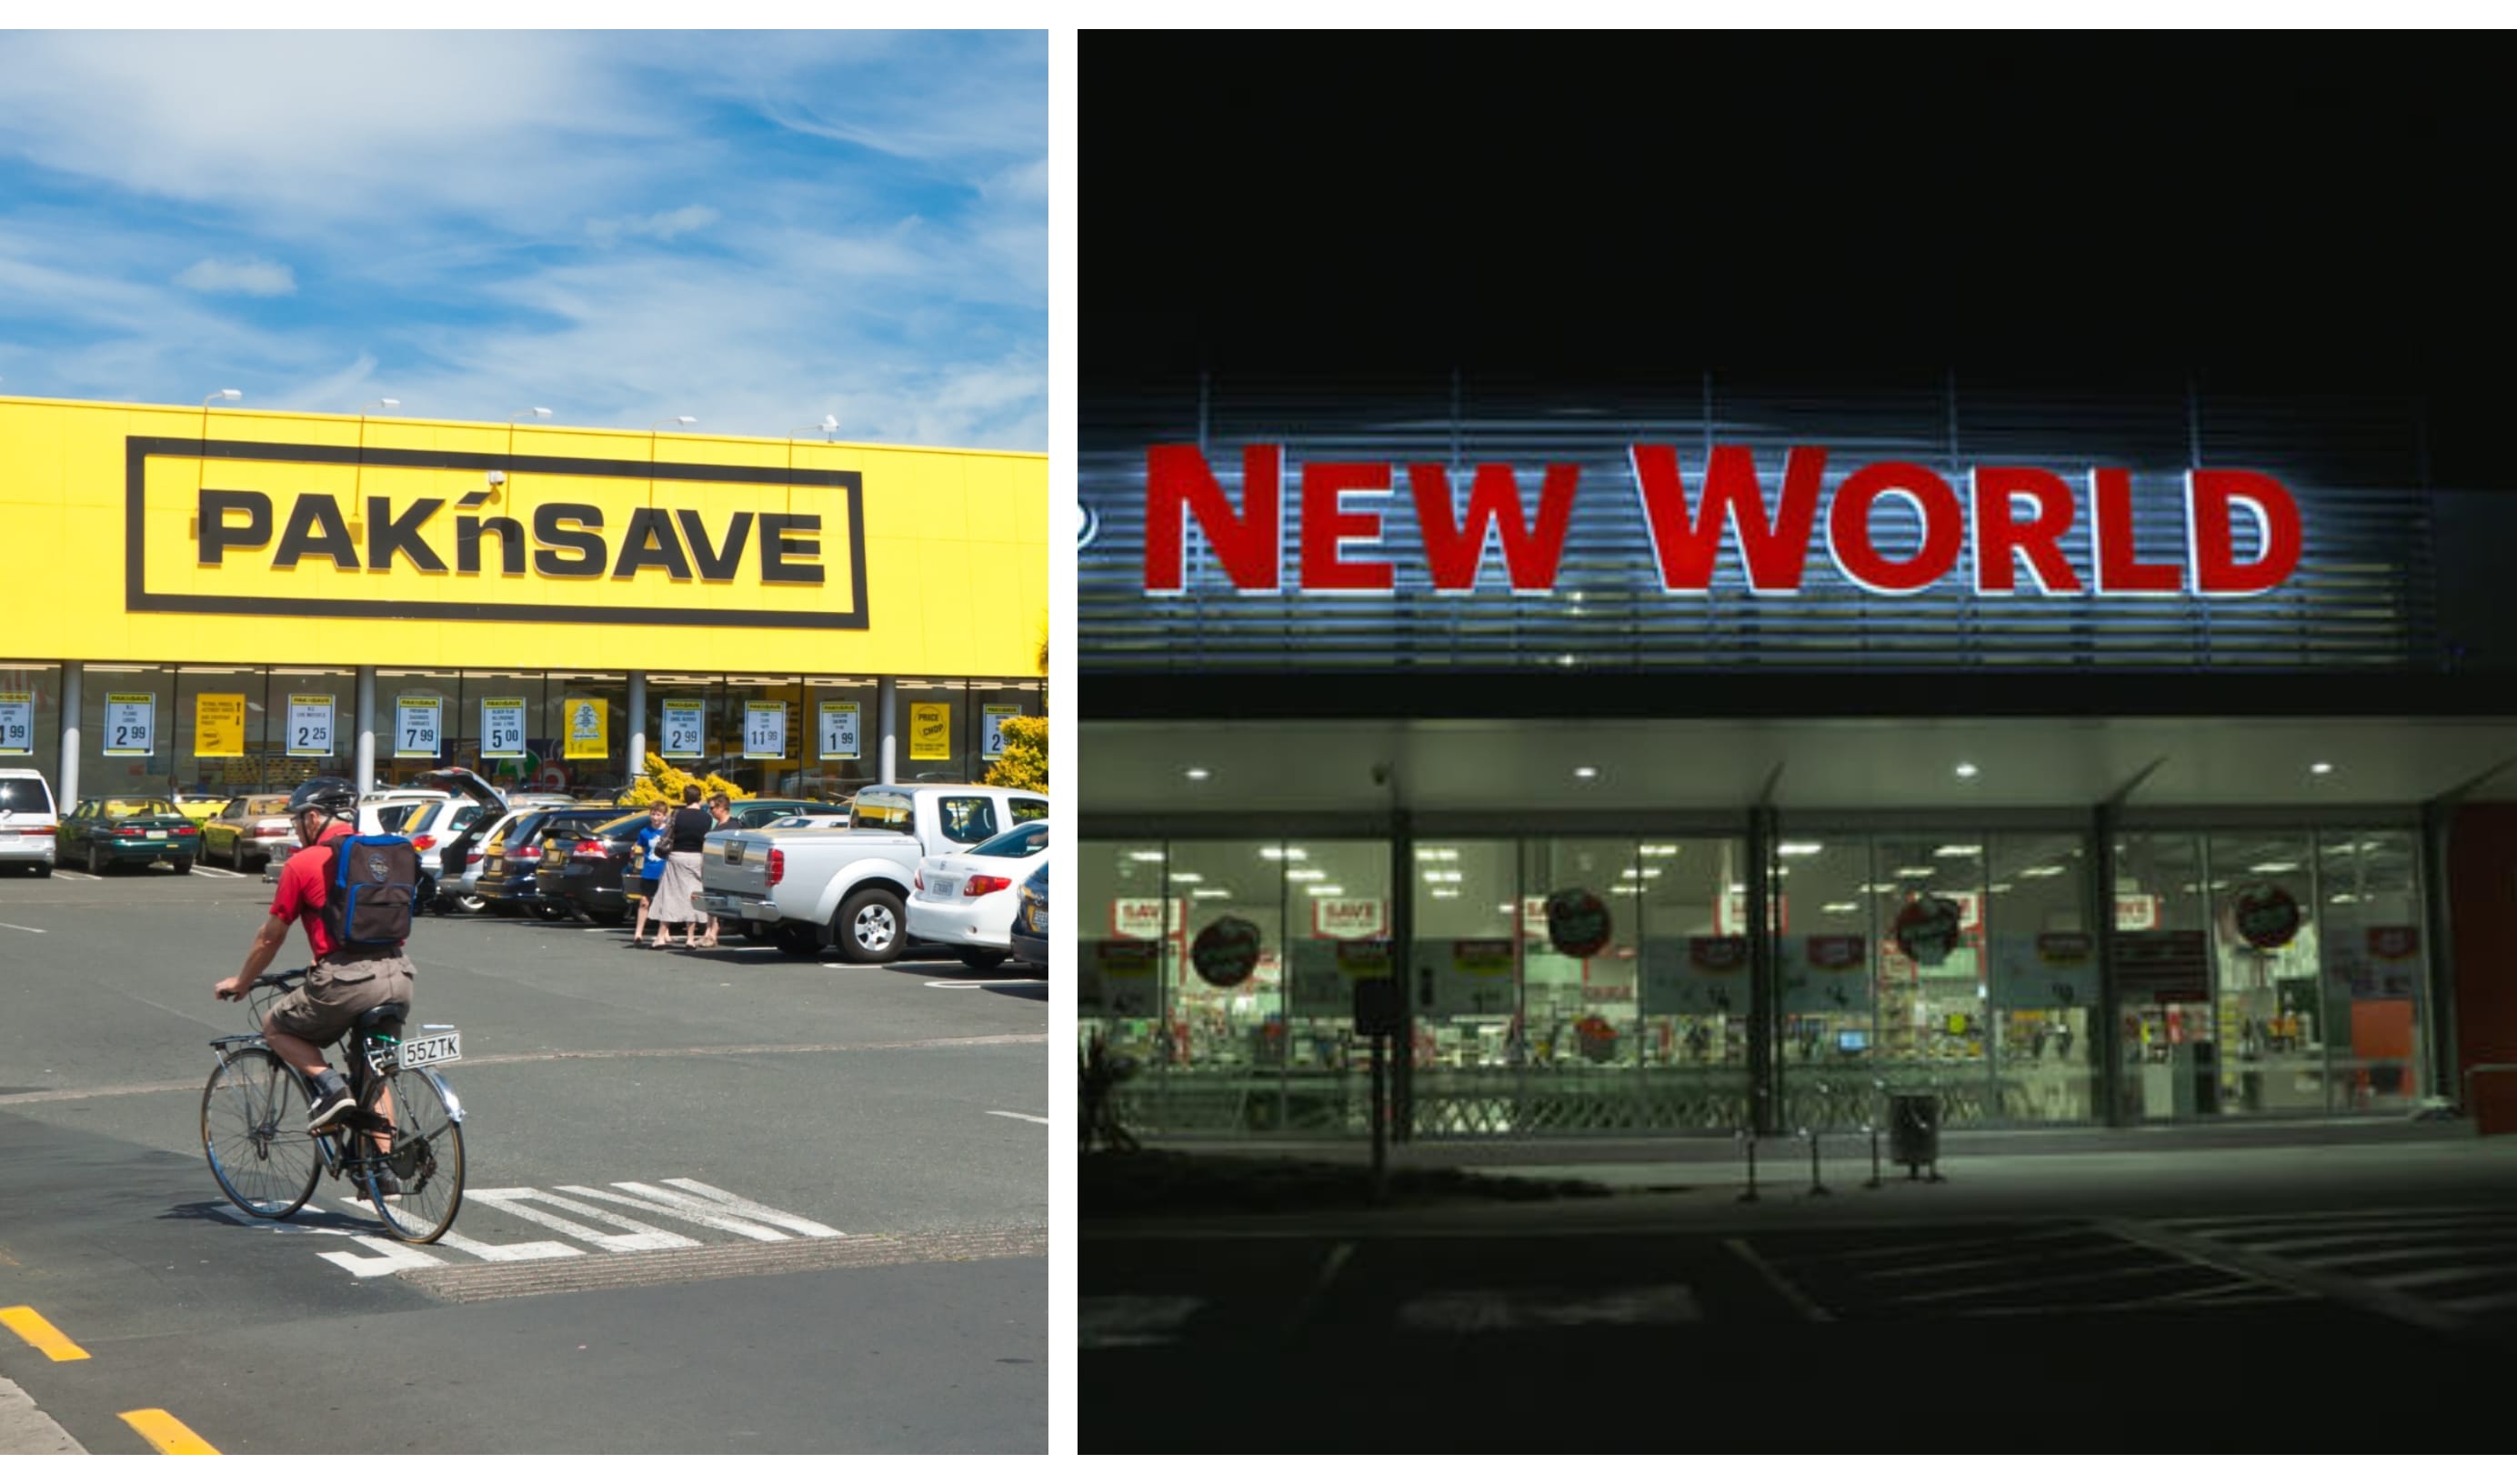 Pak'n Save and New World supermarkets